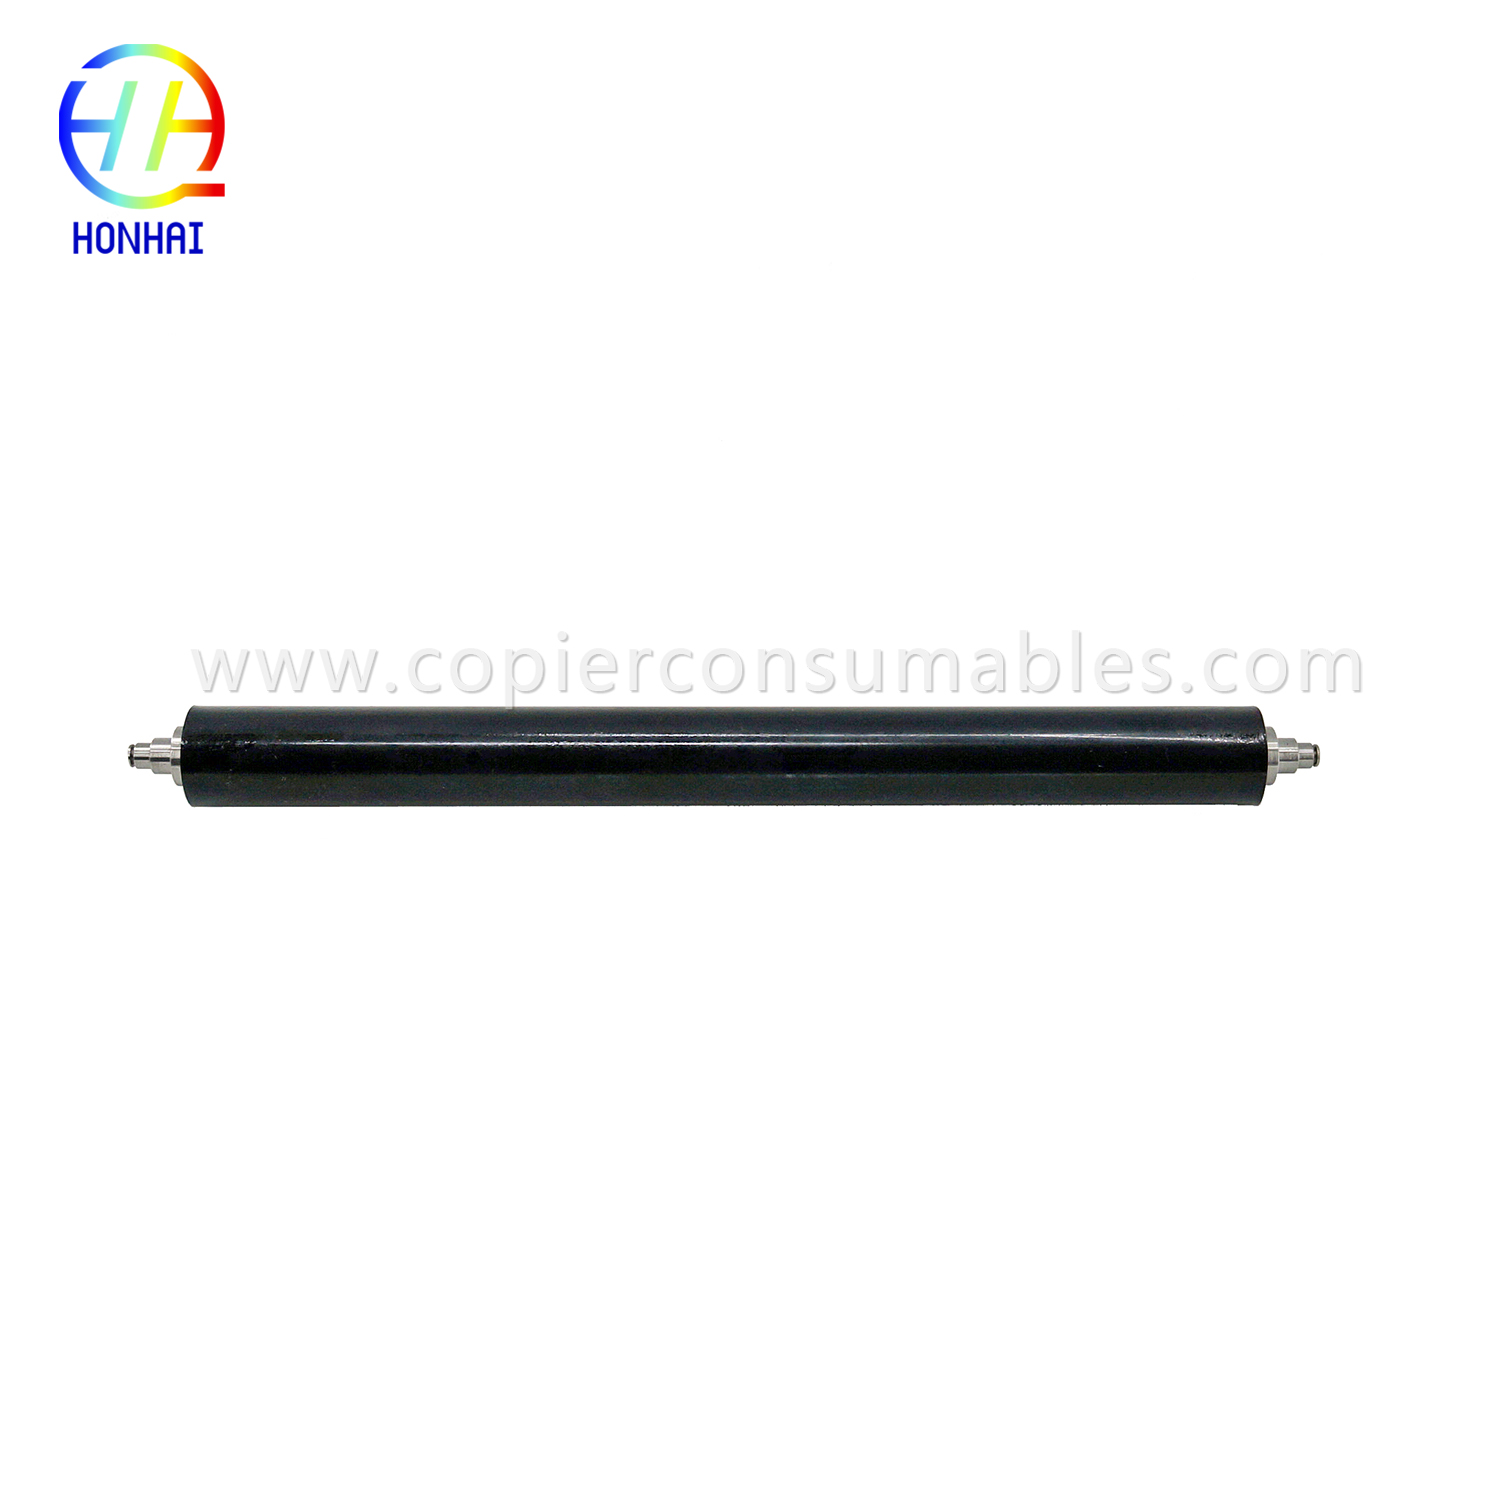 Lower Pressure Roller for Toshiba ES255 256 257 305 306 307 6LH58426000